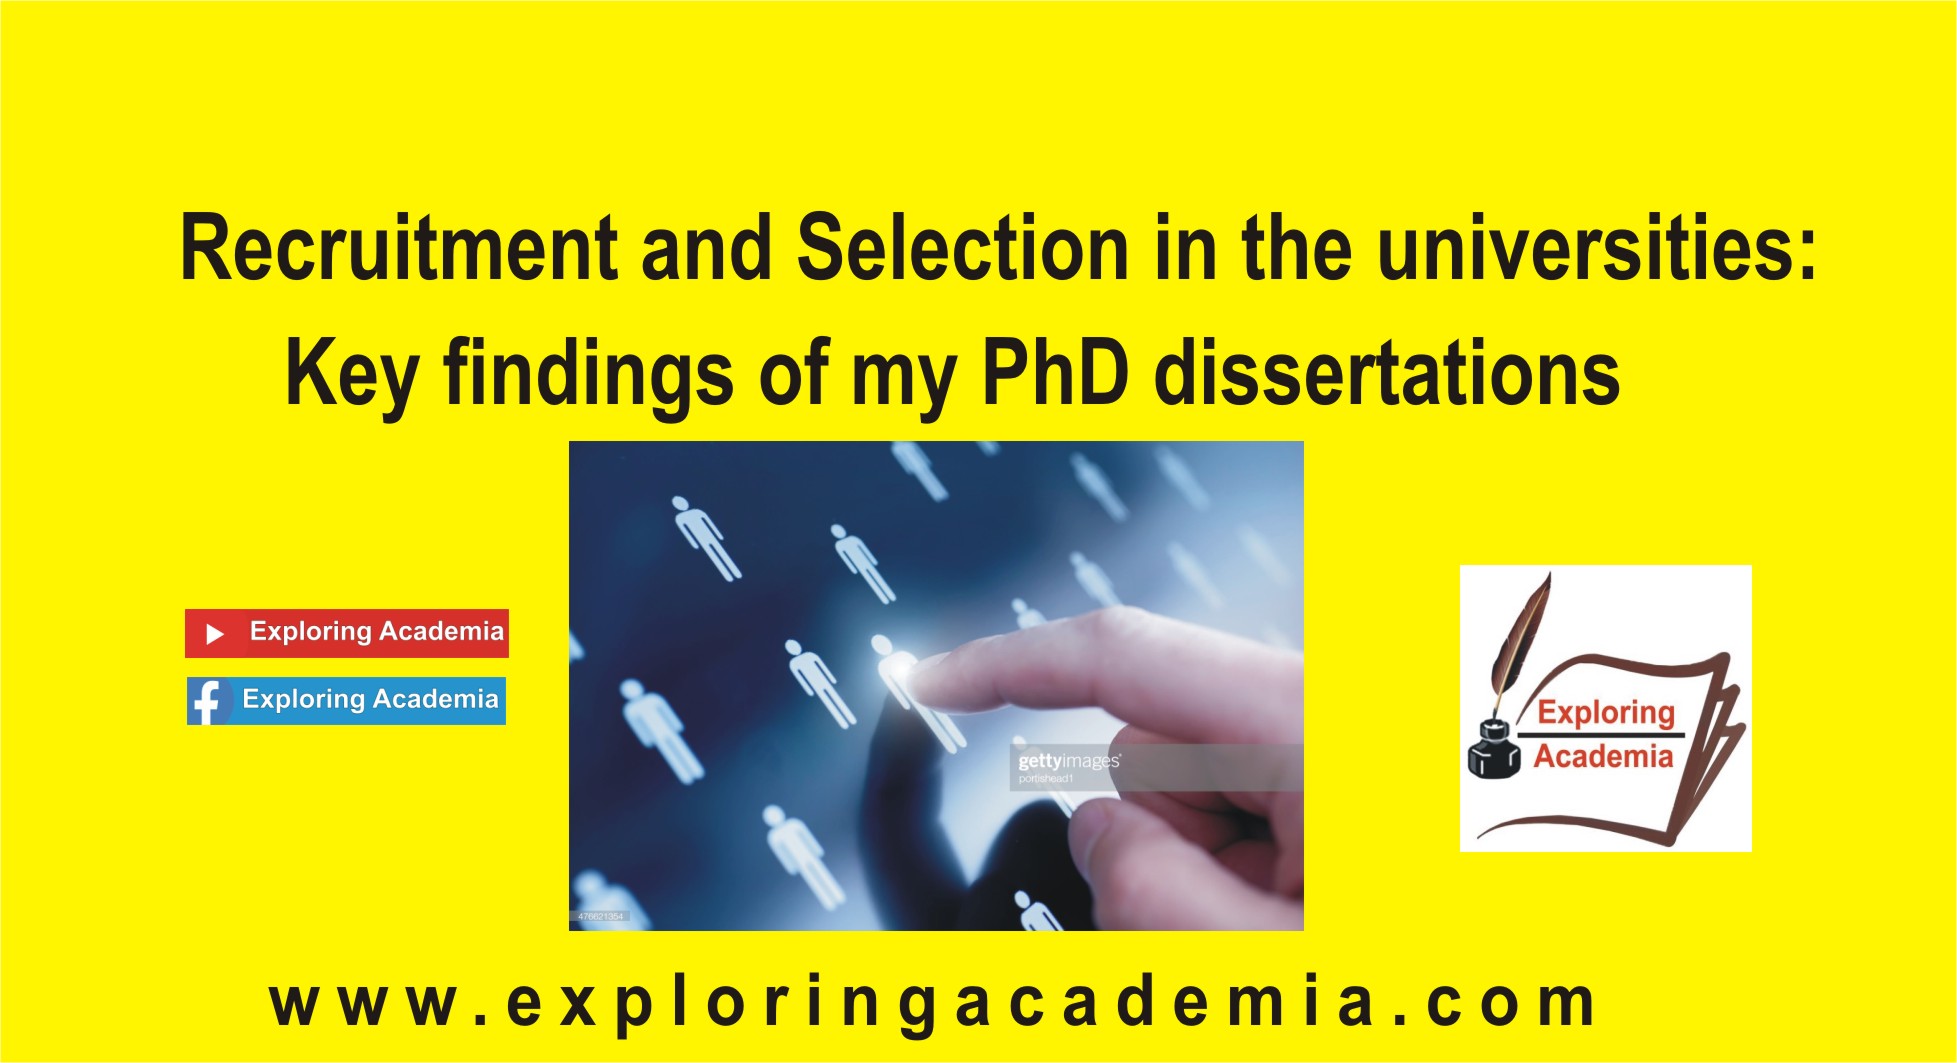 Recruitment and Selection in the universities: Key findings of my PhD dissertations